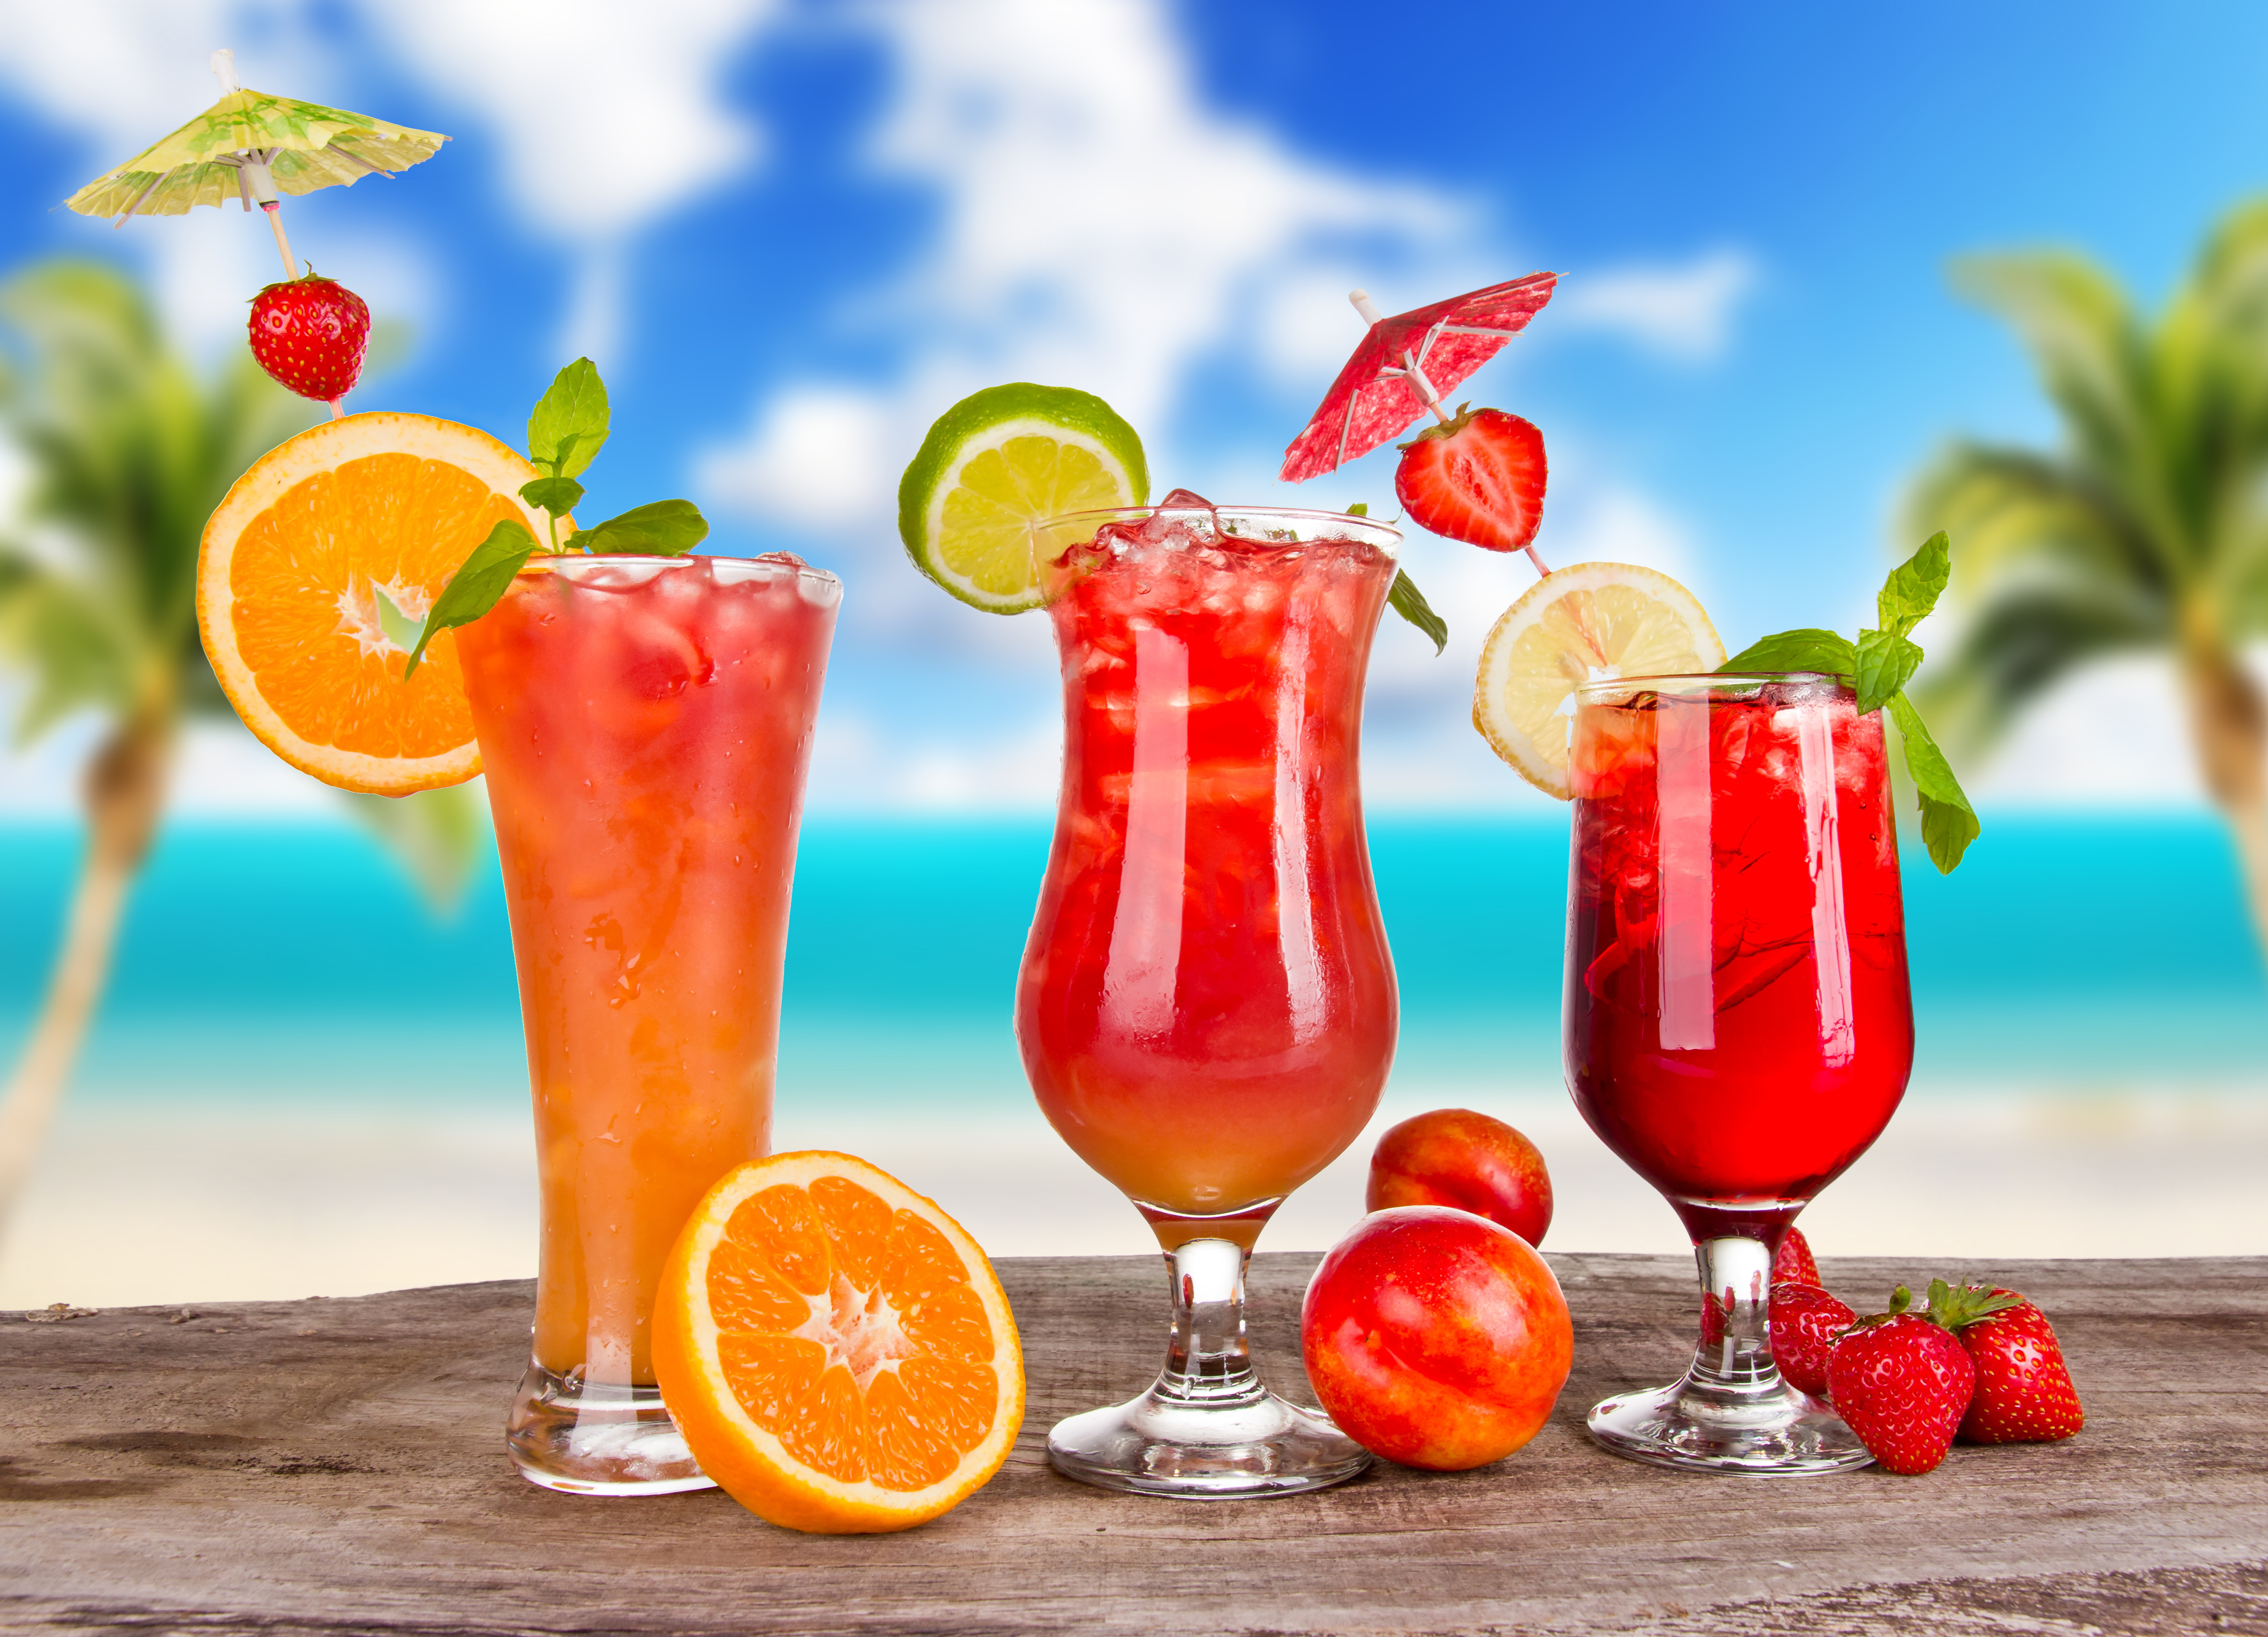 food and drink wallpaper,drink,juice,hurricane,cocktail garnish,non alcoholic beverage